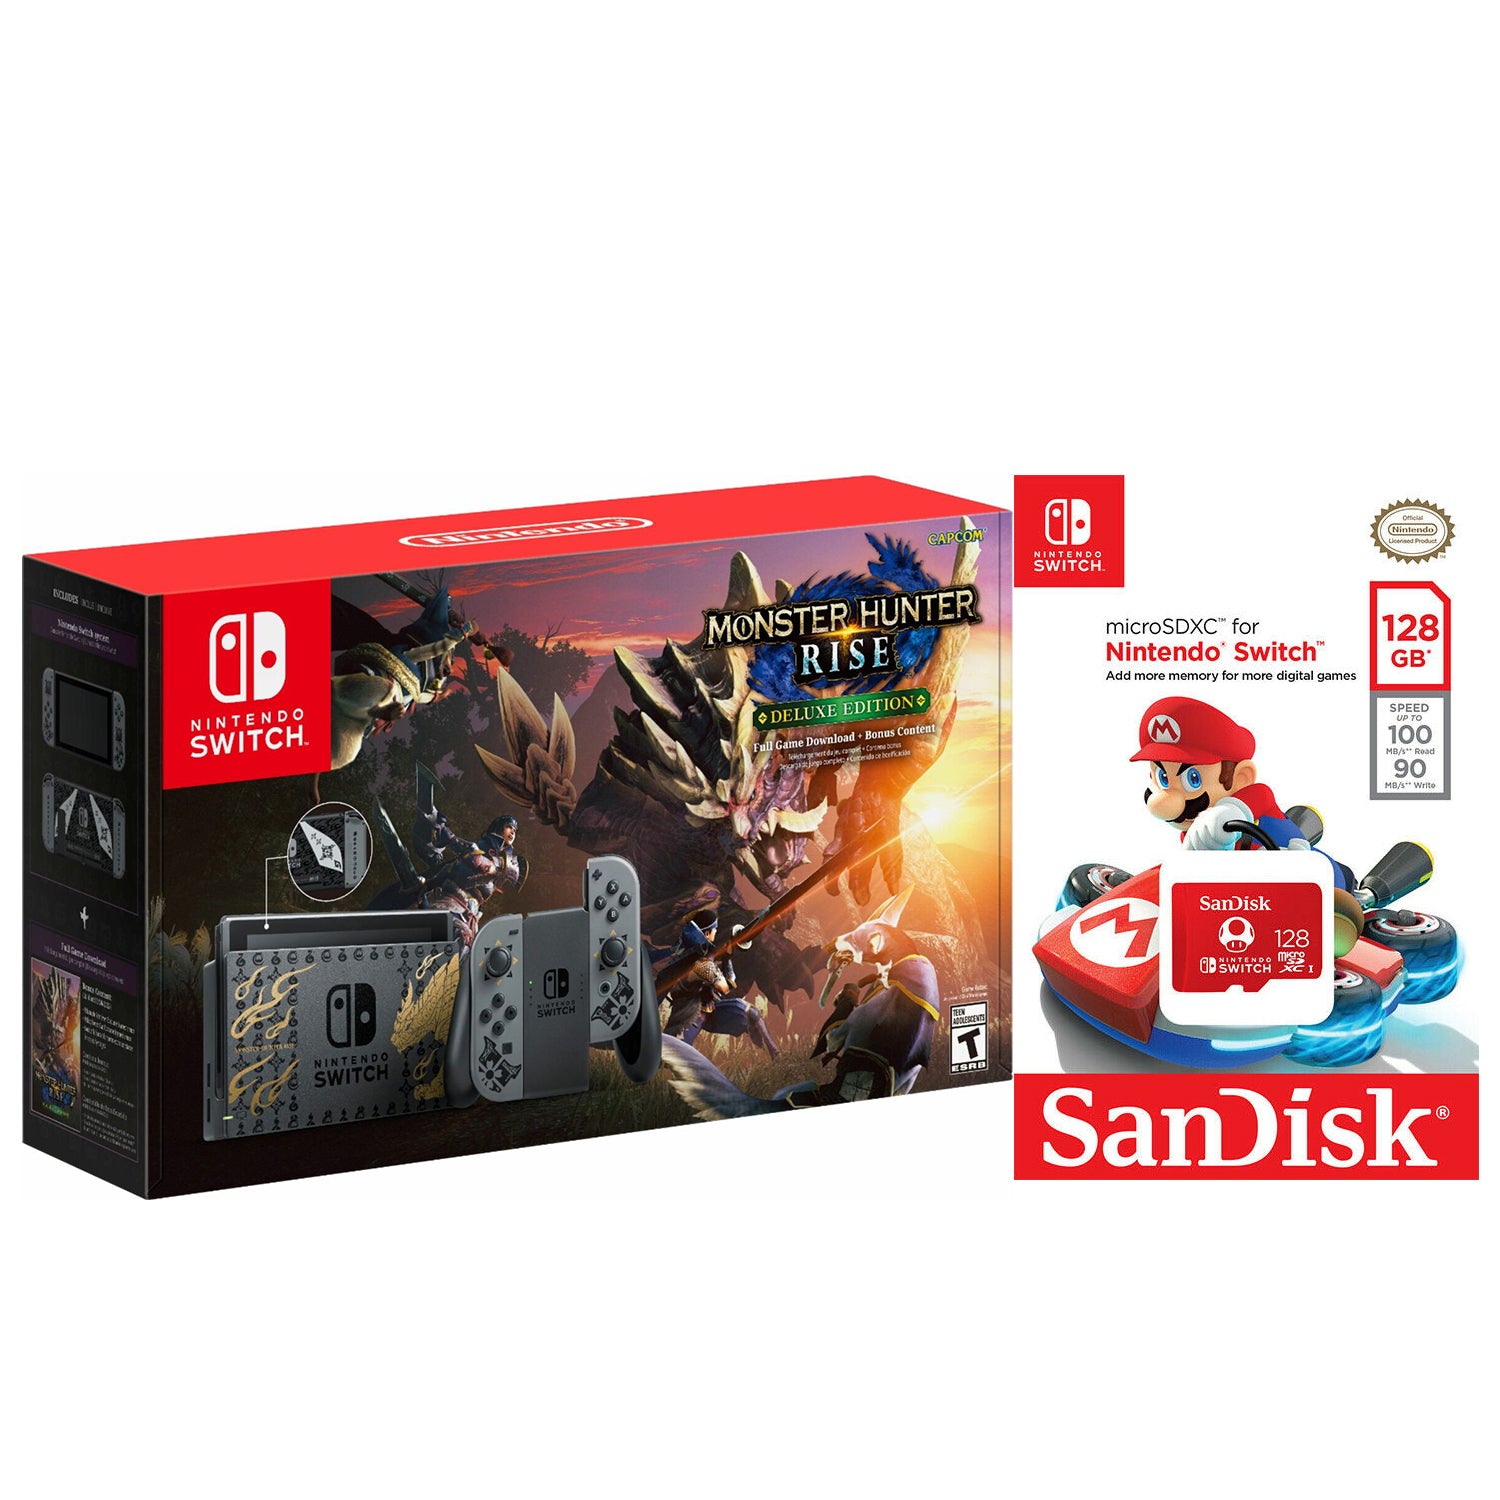 Nintendo Switch MONSTER HUNTER RISE Deluxe Edition with Sandisk 128GB MicroSD Card and MicroSD Card Reader Bundle - Pro-Distributing